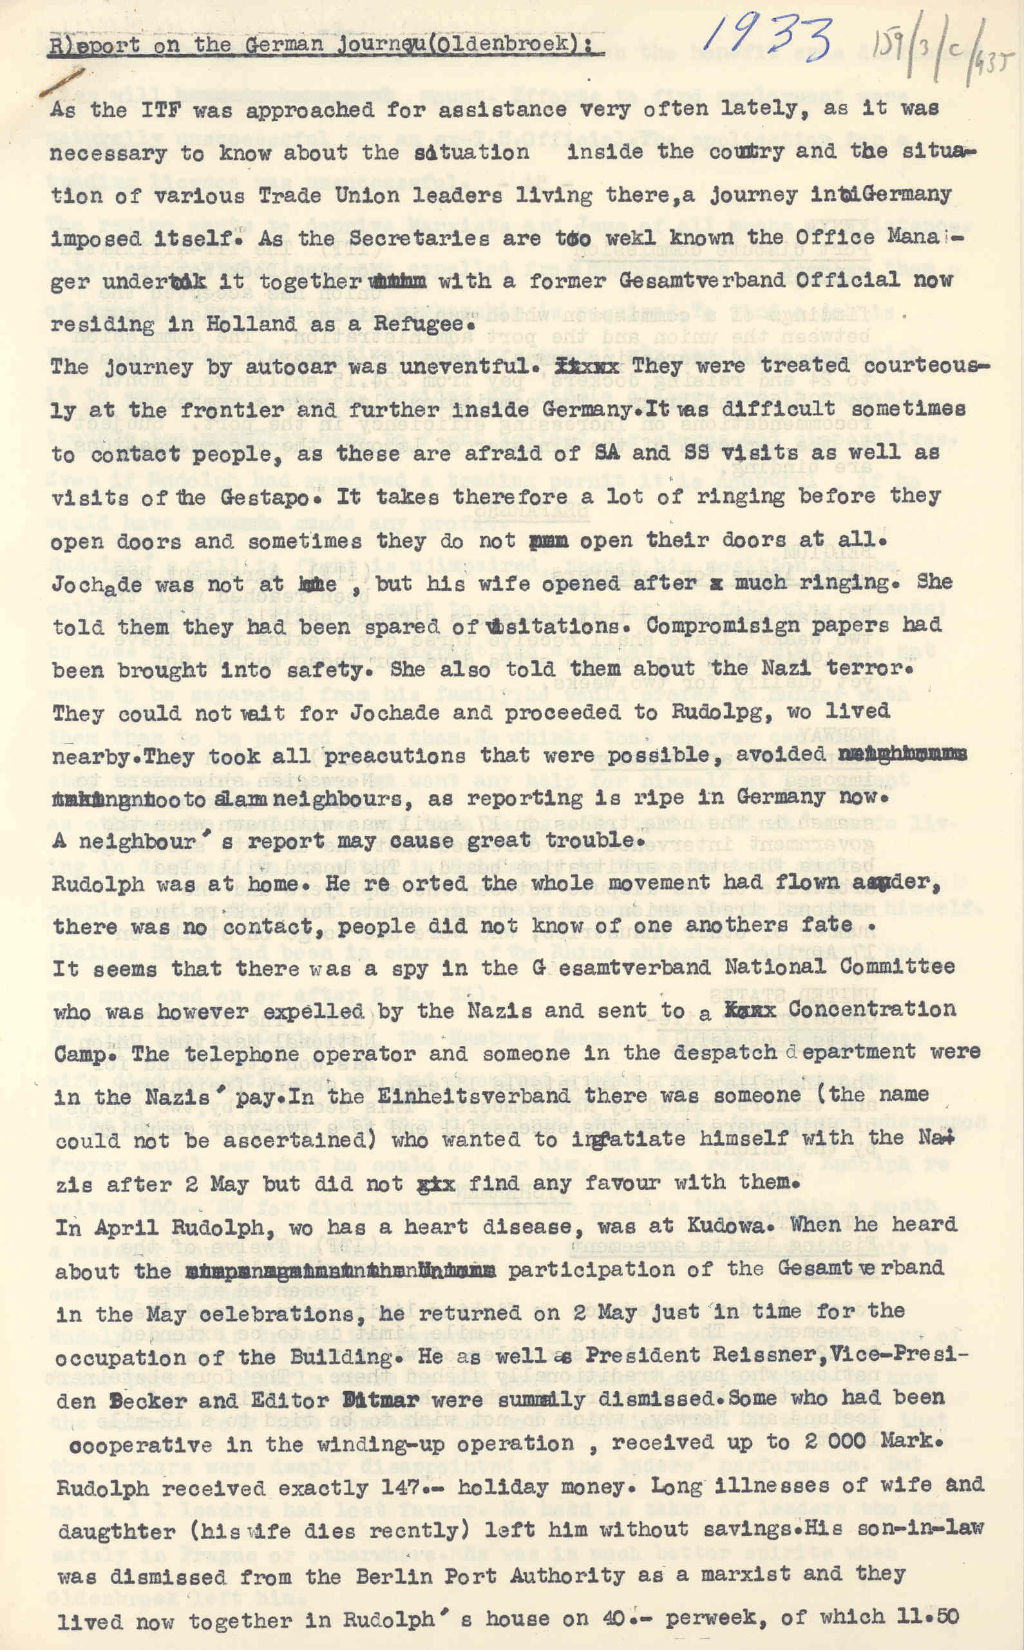 Report on visit to Germany to meet trade union leaders following the election of Hitler, 1933